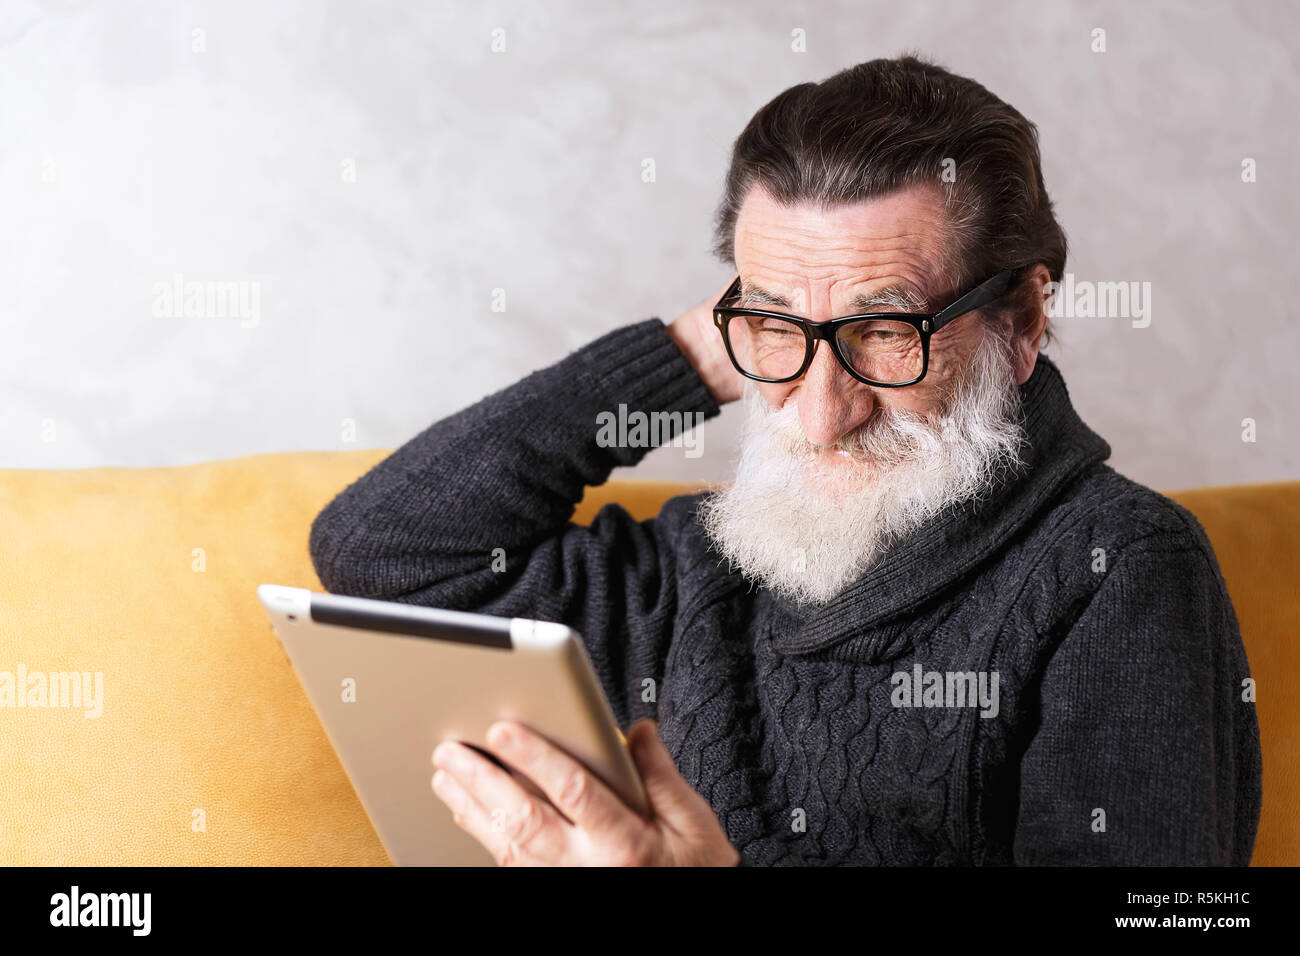 Senior bearded man in glasses wearing grey pullover sitting on a yellow sofa in his light living room and looking doubtfully on the digital tablet Stock Photo